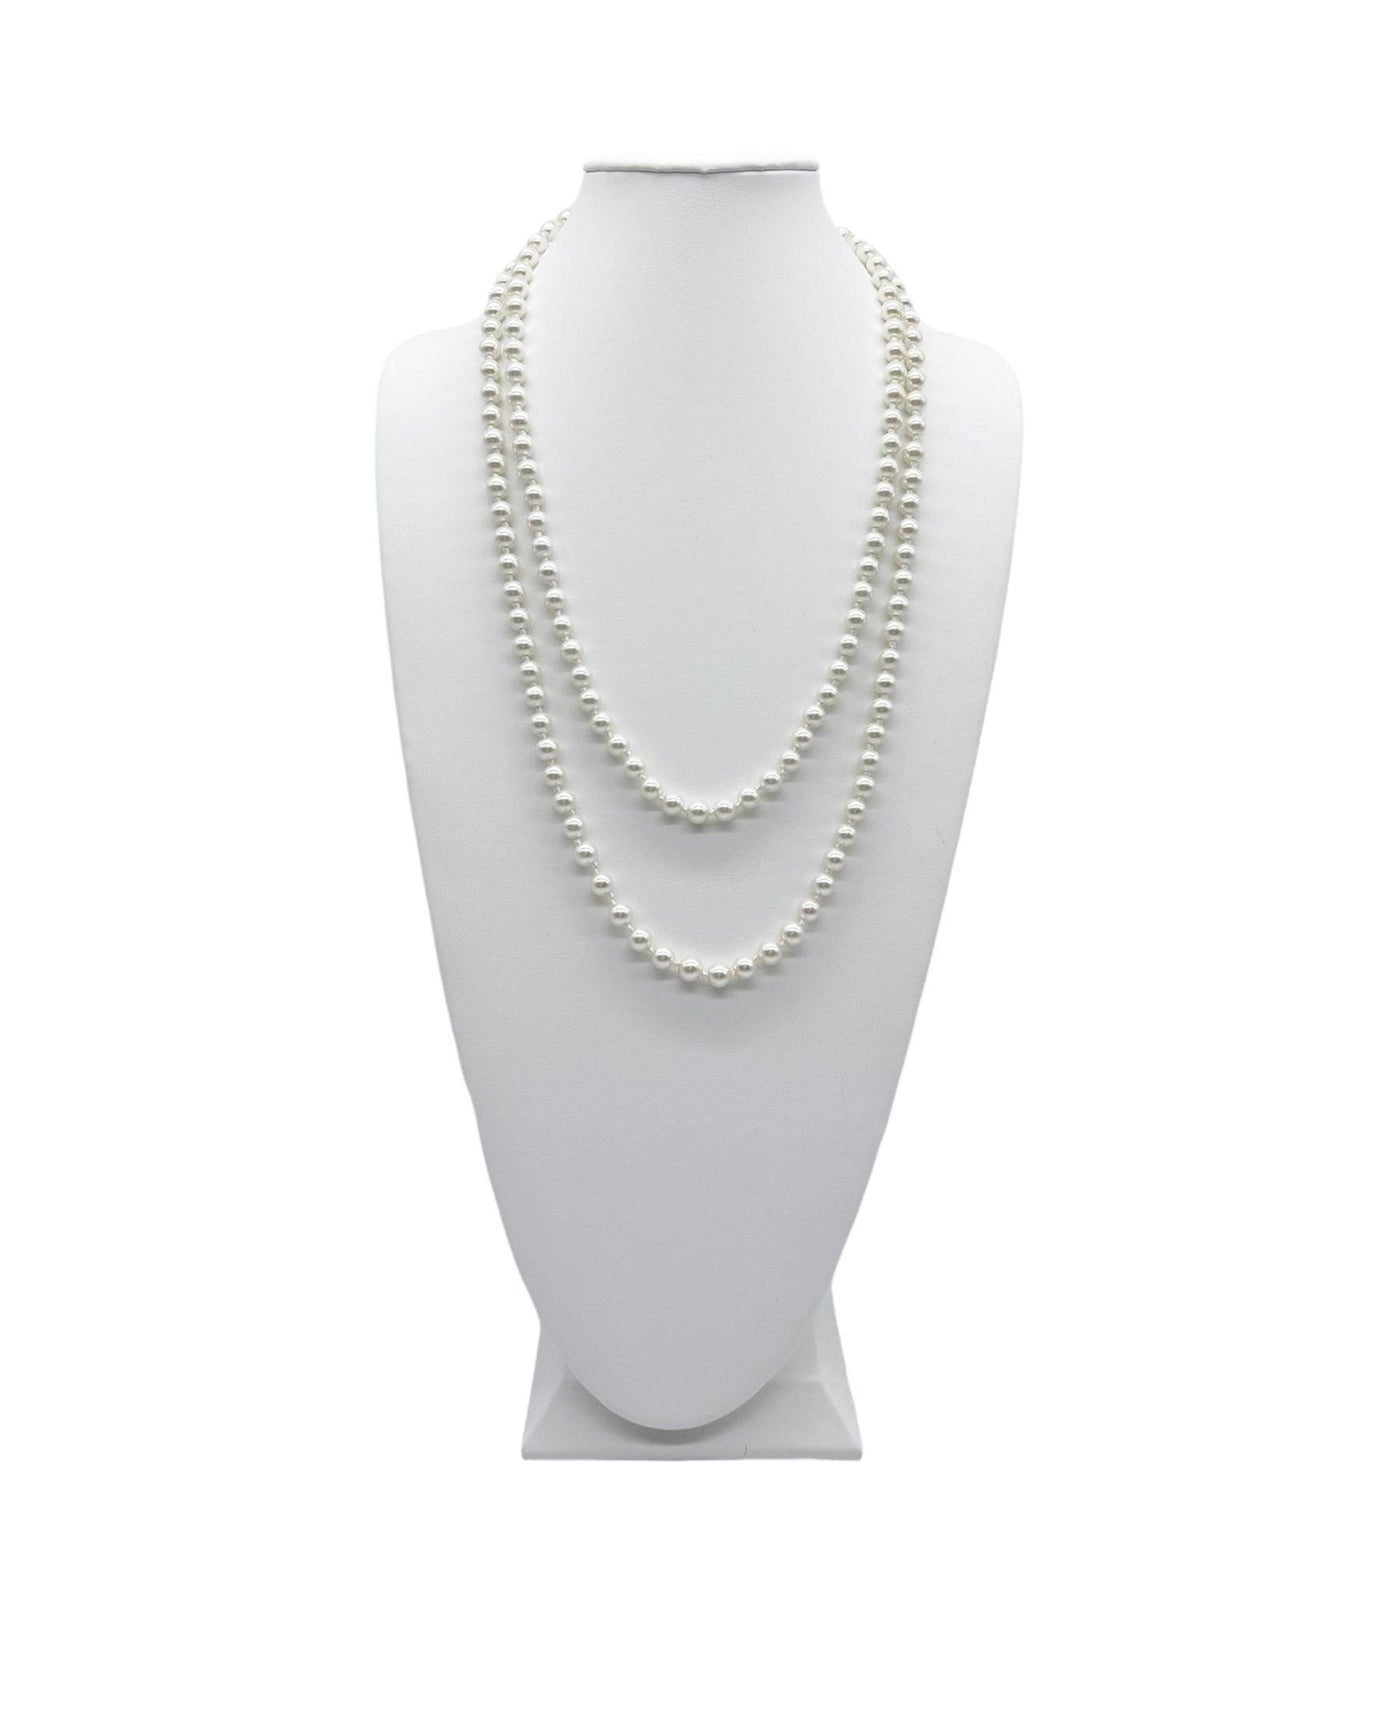 Long pearl necklace doubled up on a white neck display